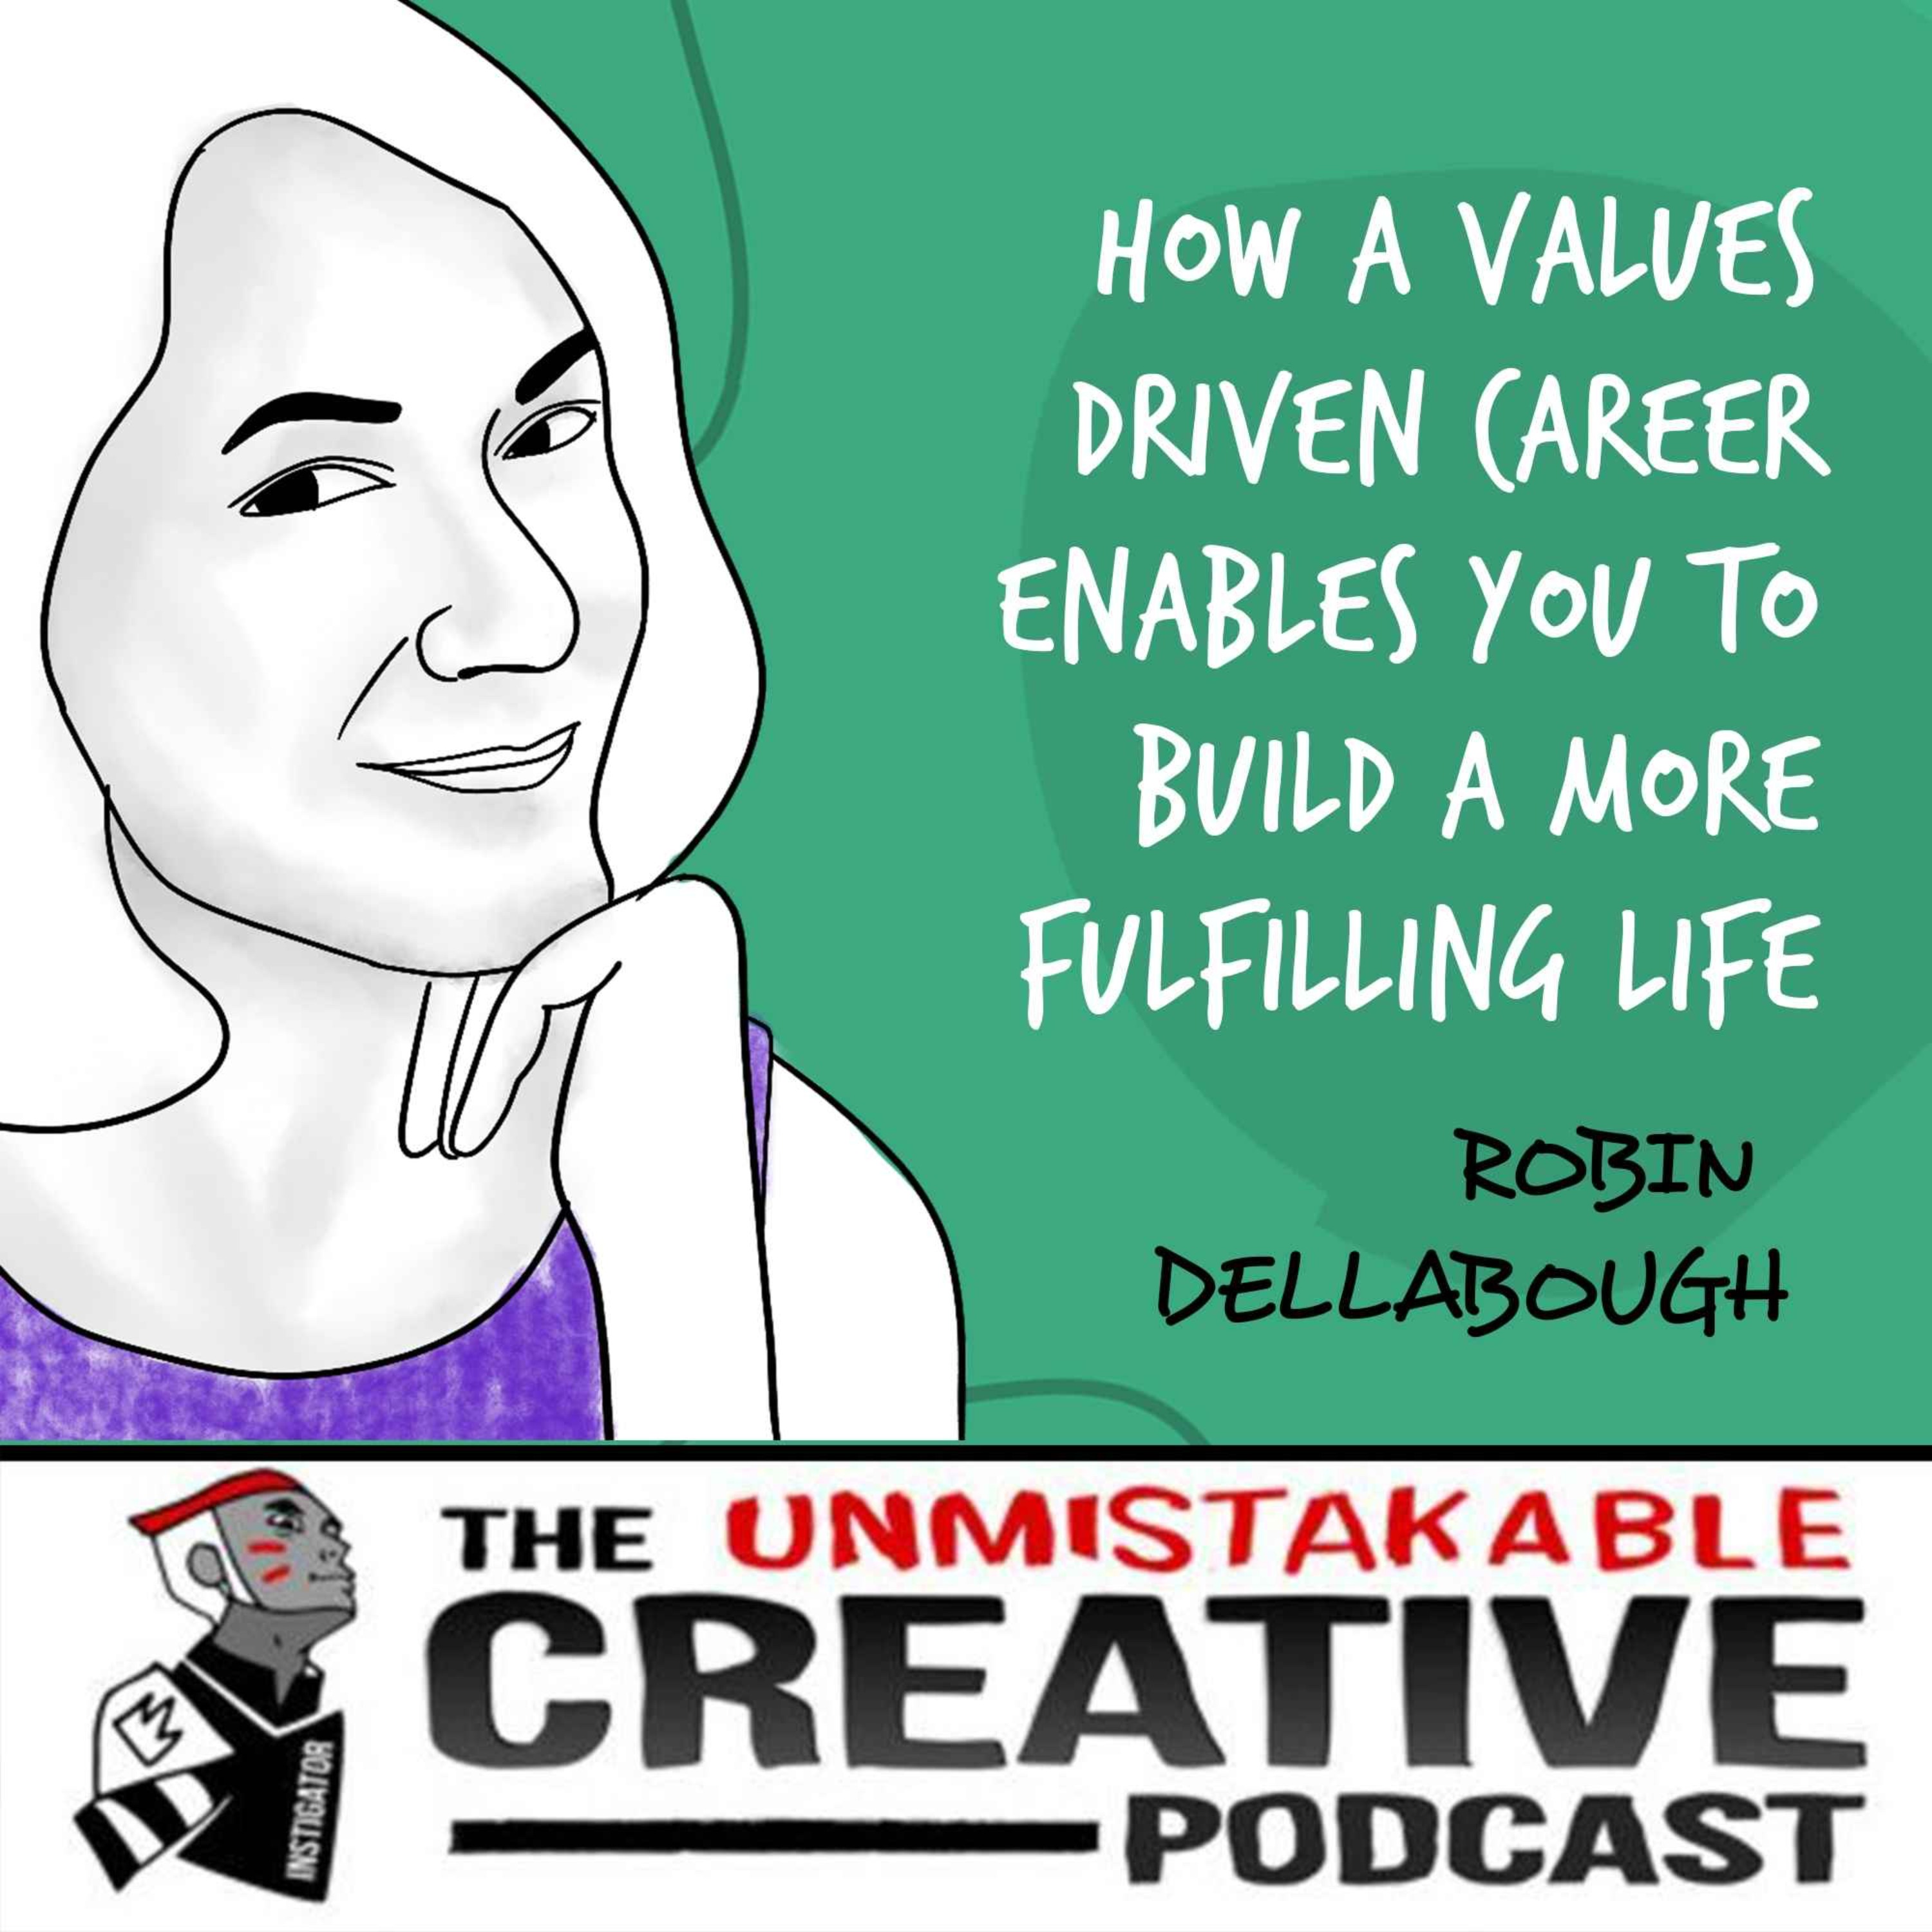 Robin Dellabough | How a Values Driven Career Enables you To Build a More Fulfilling Life Image